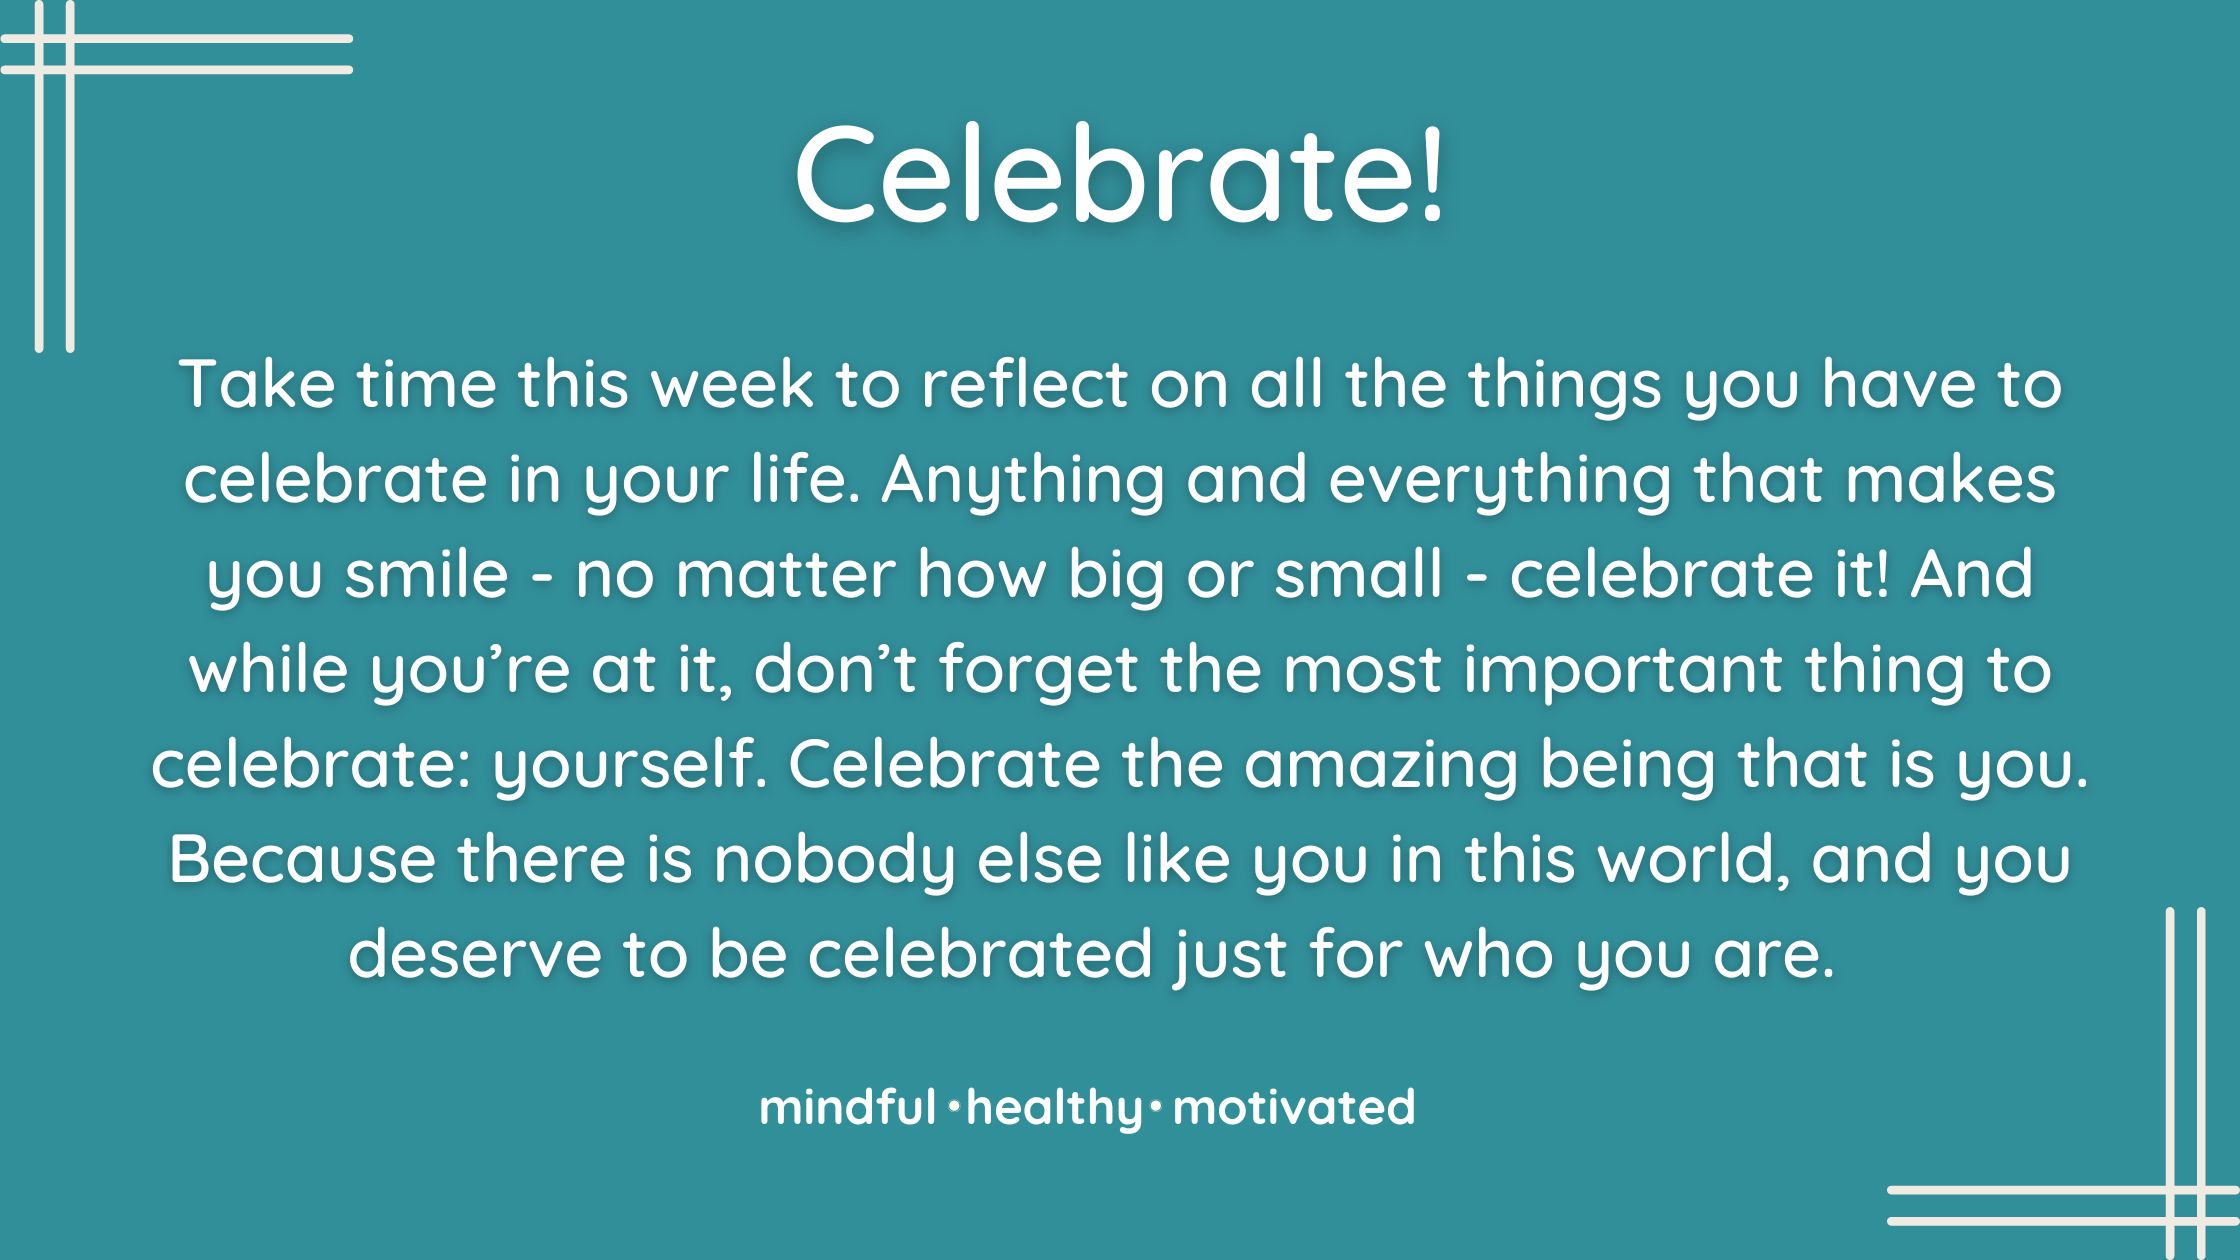 Celebrate all the positive things you have going on in life. And celebrate the amazing being that is you!